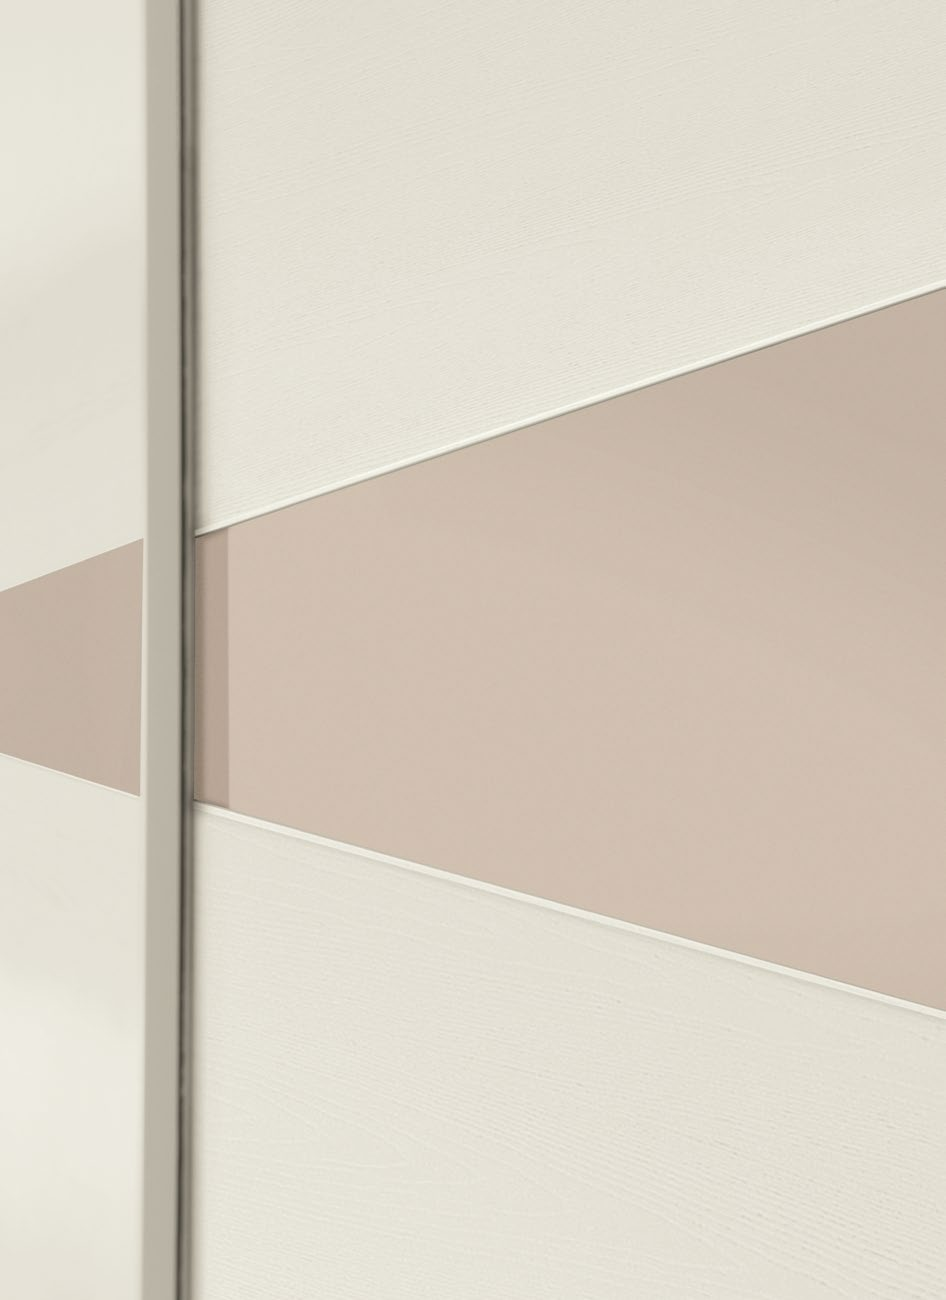 he 135 or 90 cm door is enriched by the central Tinsert available in different finishes, colors and materials,